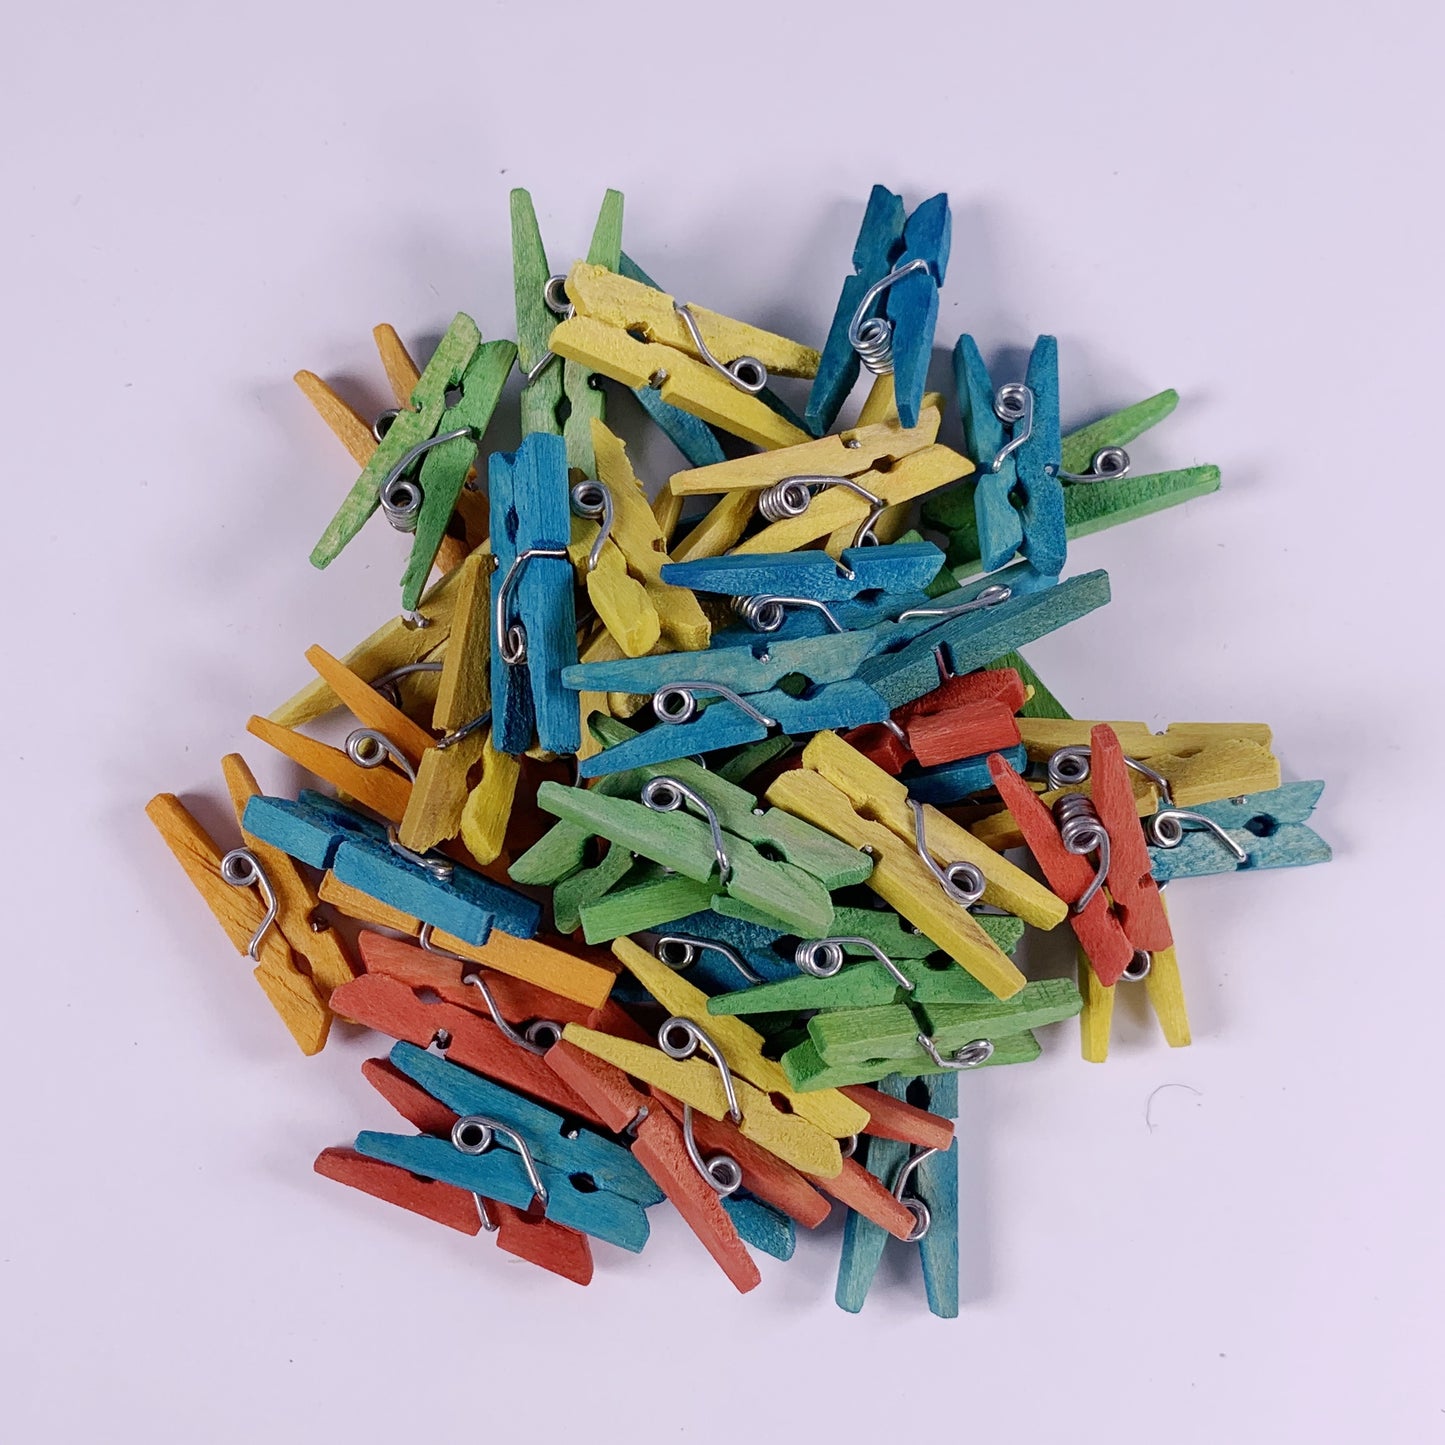 PEGS FOR HANDING PICTURES